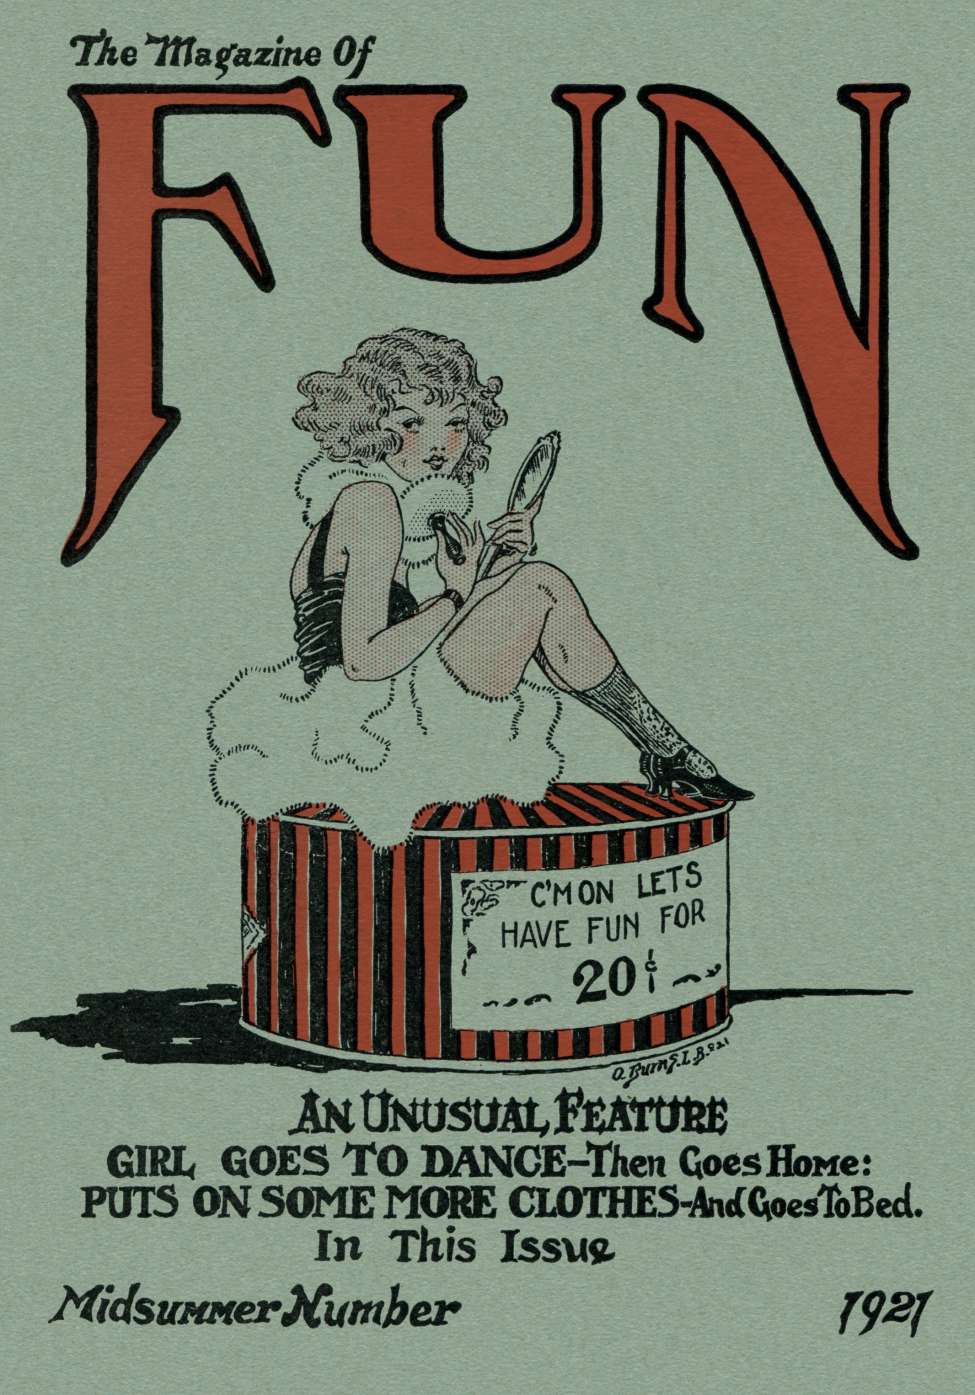 Comic Book Cover For The Magazine Of Fun v1 1